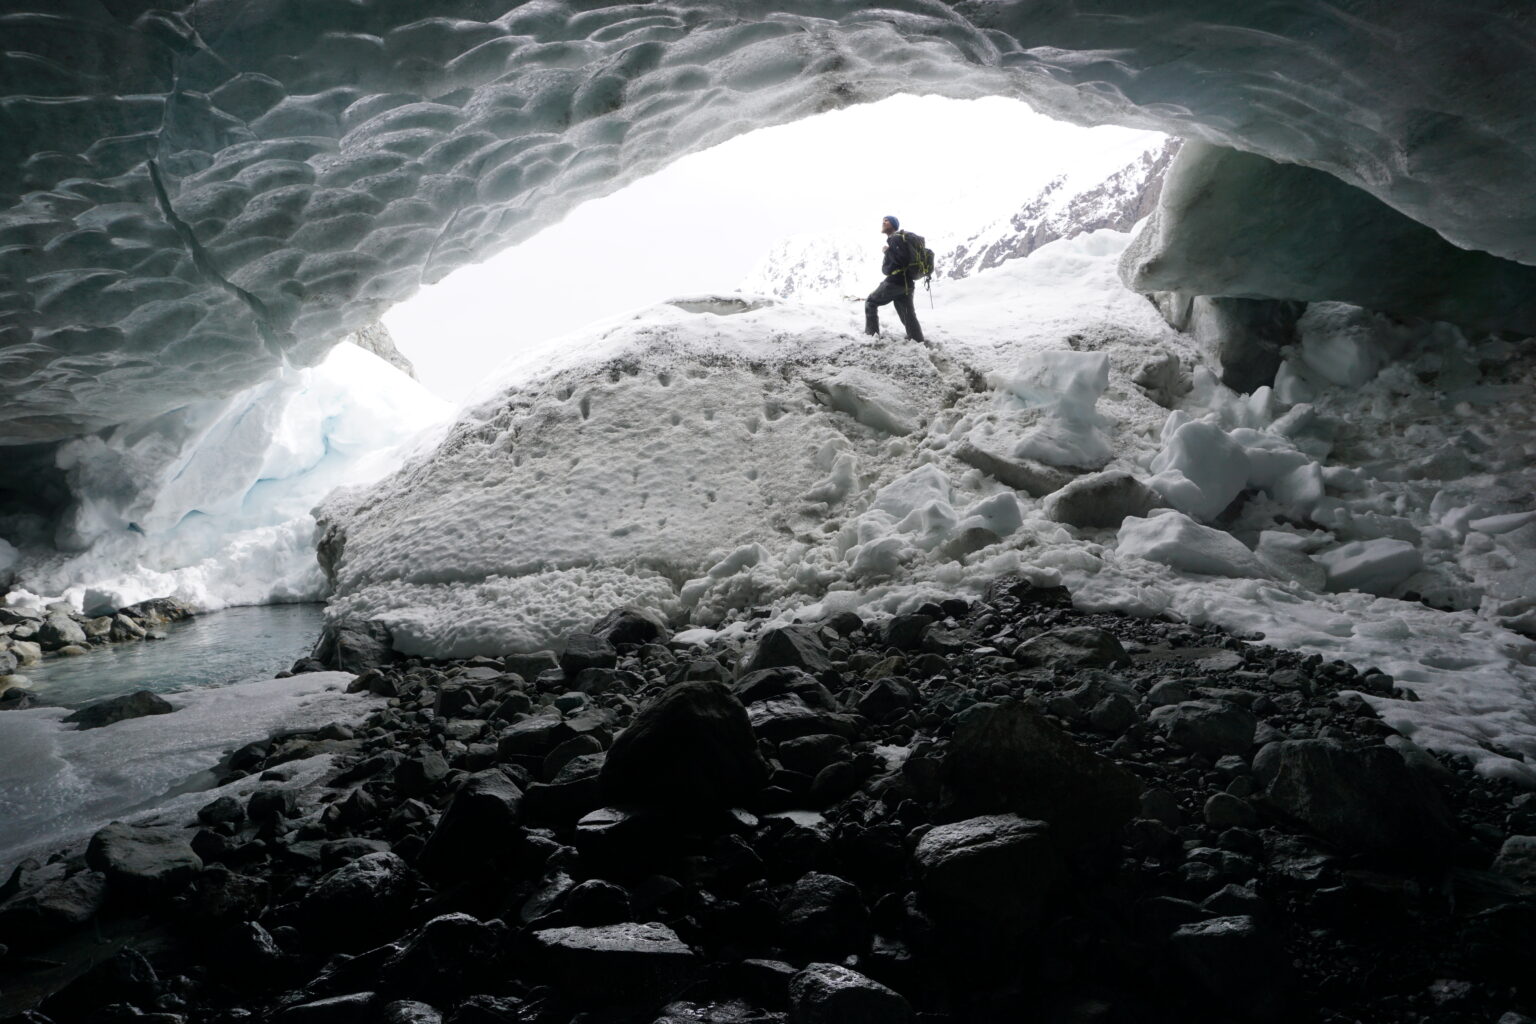 Hiking into the glacial cave of Strupbeen Glacier